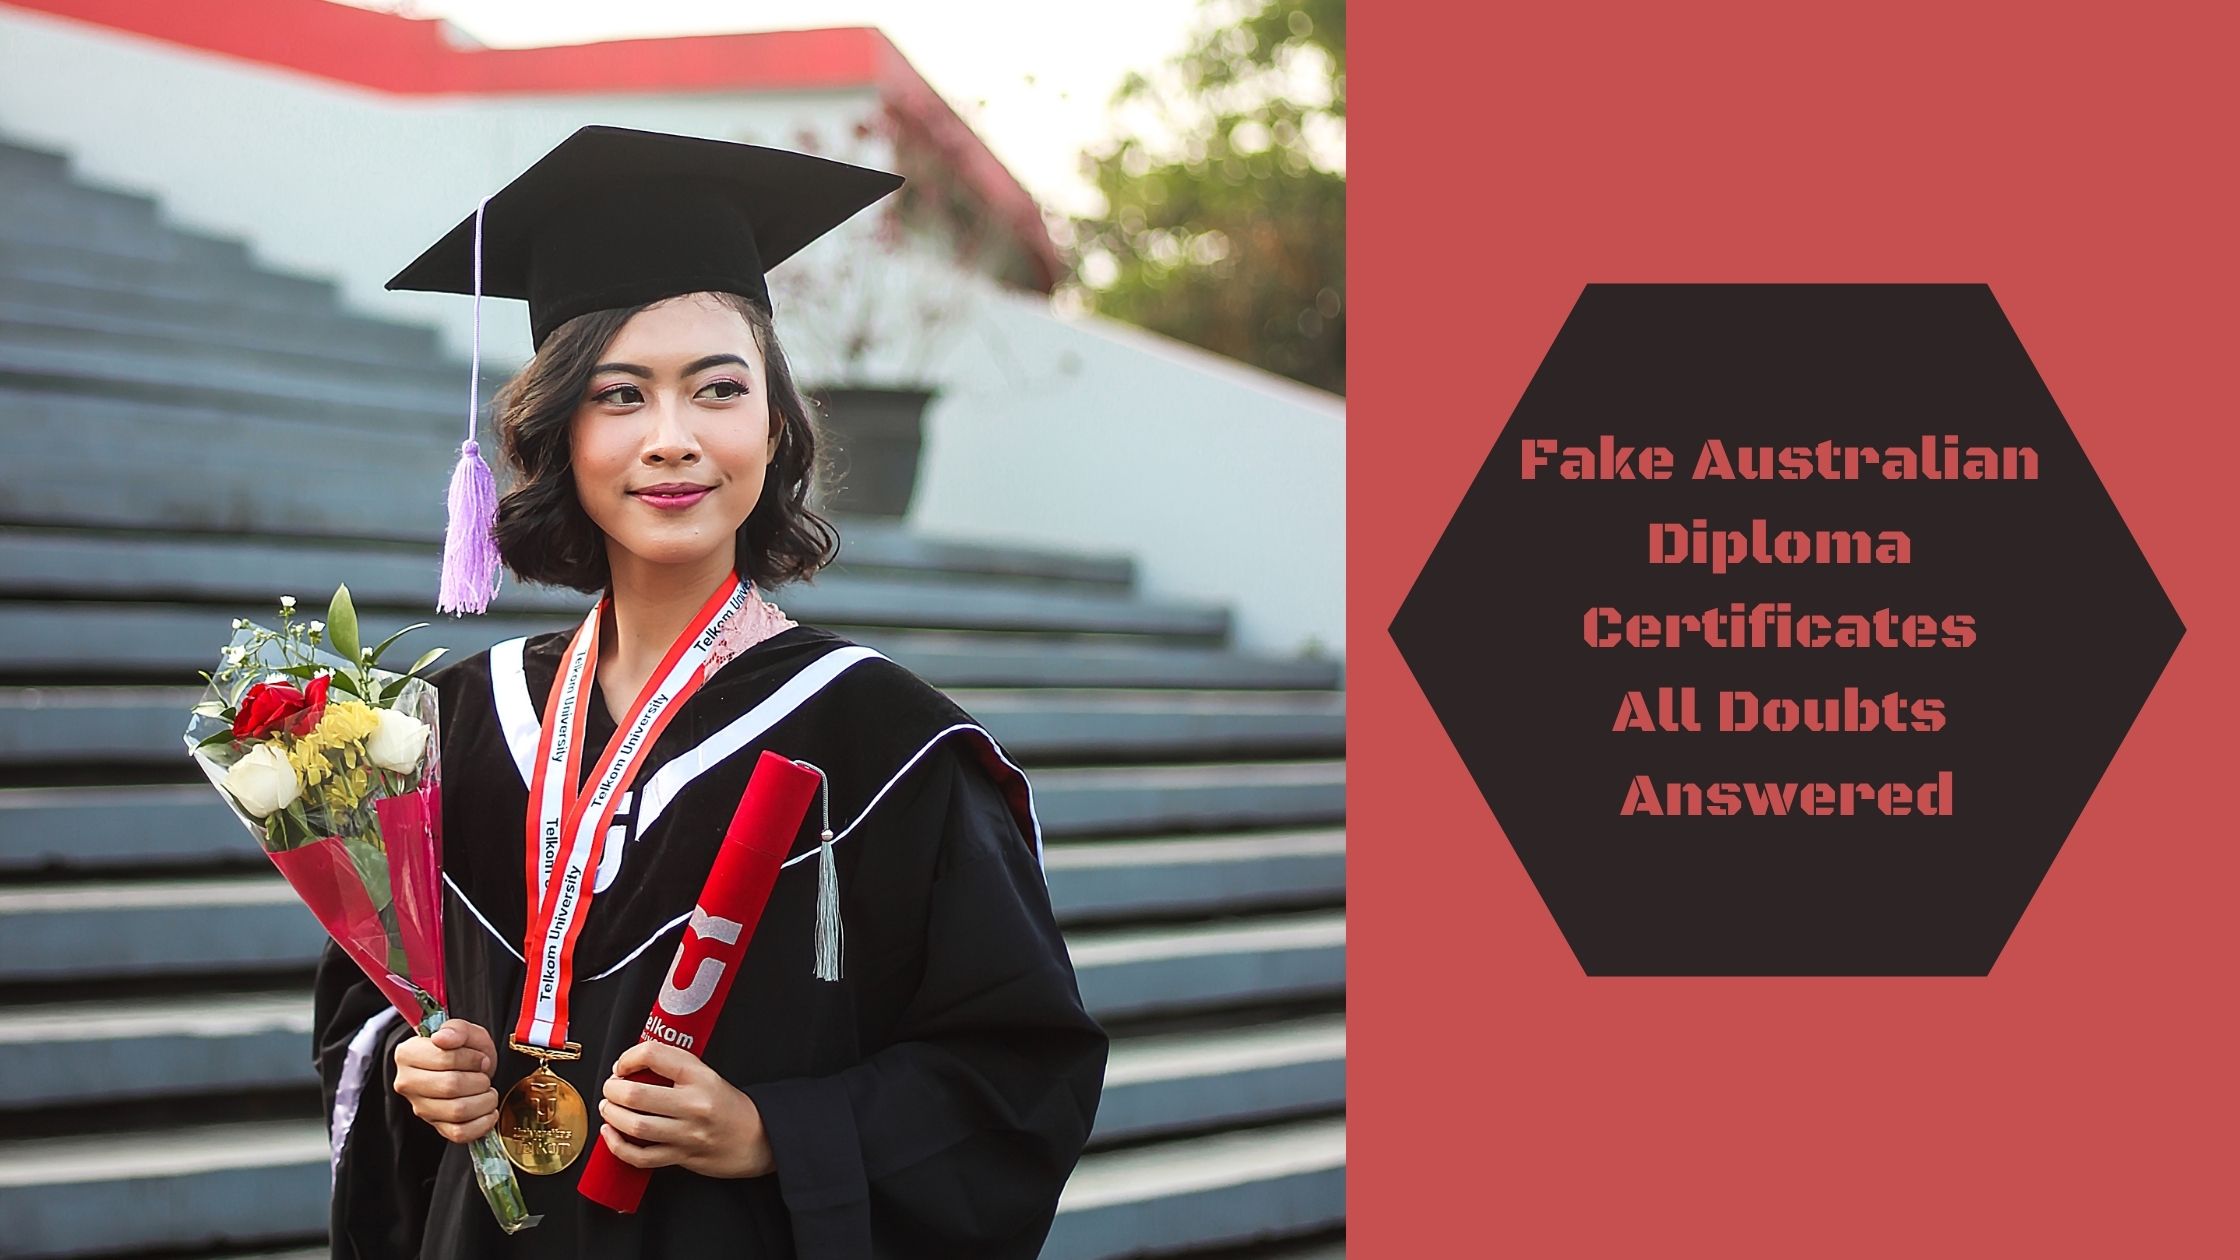 Fake Australian Diploma Certificates All Doubts Answered